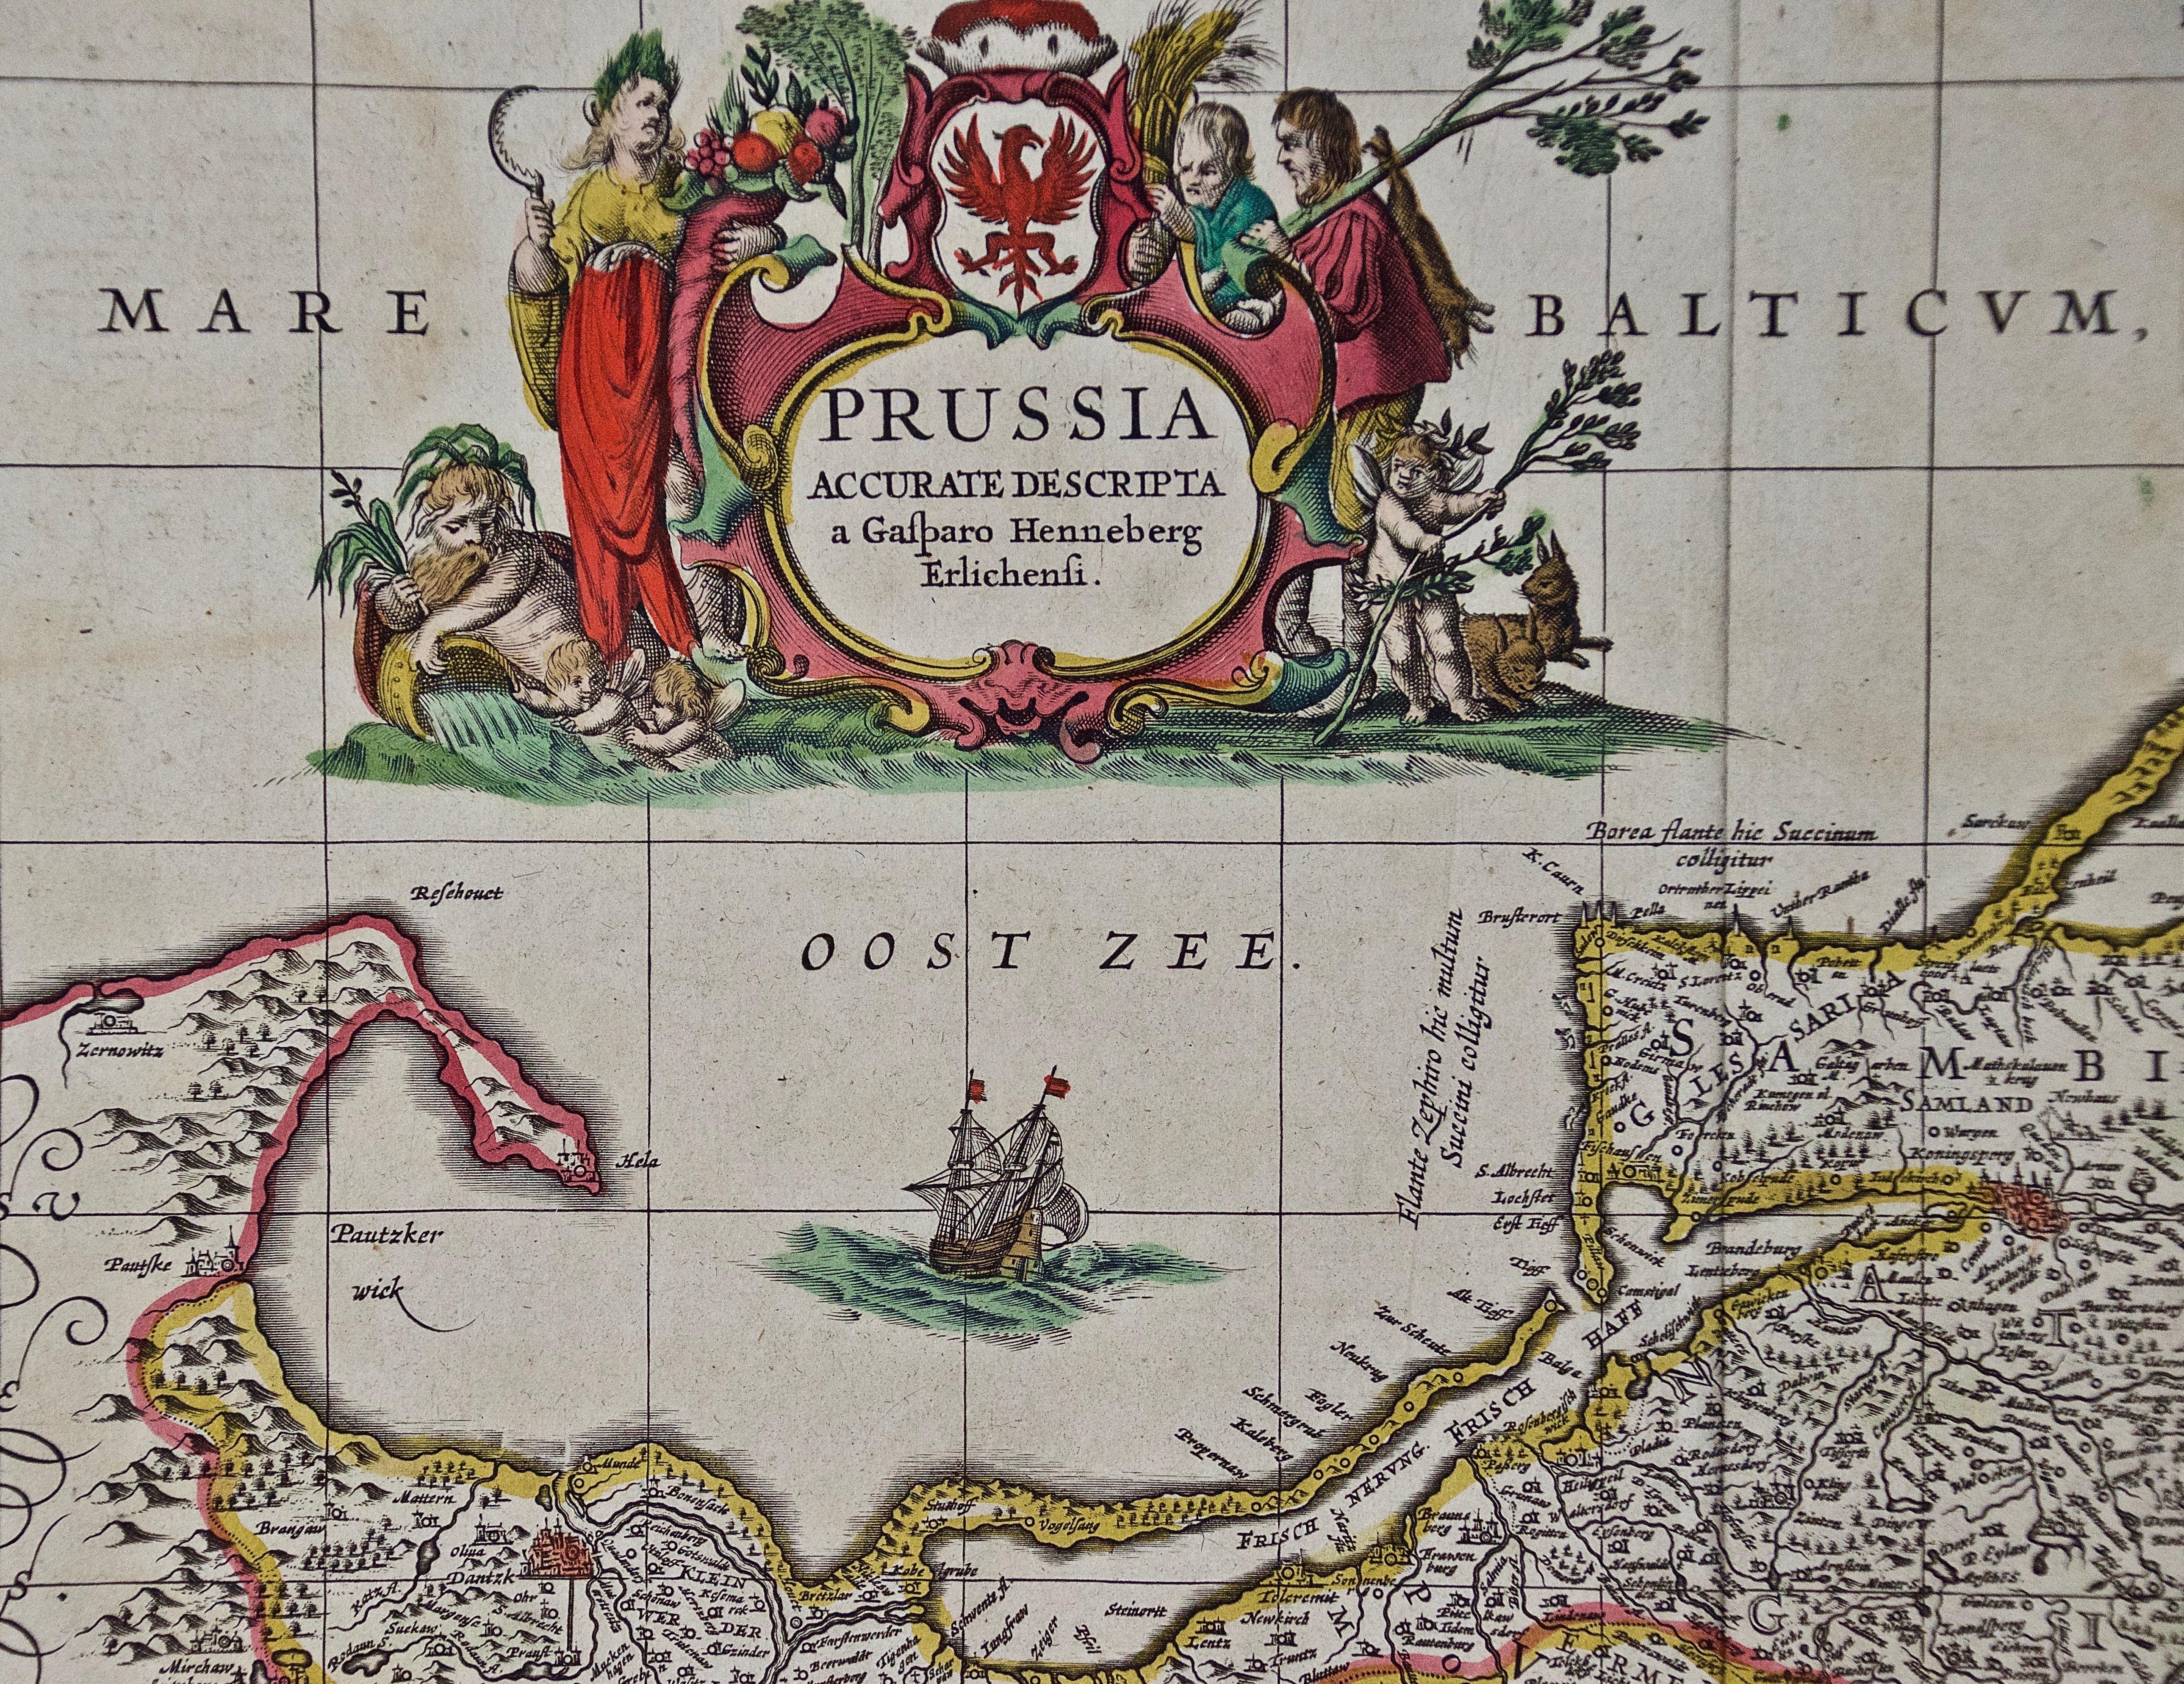 Dutch Prussia, Poland, N. Germany, Etc: A Hand-colored 17th Century Map by Janssonius For Sale